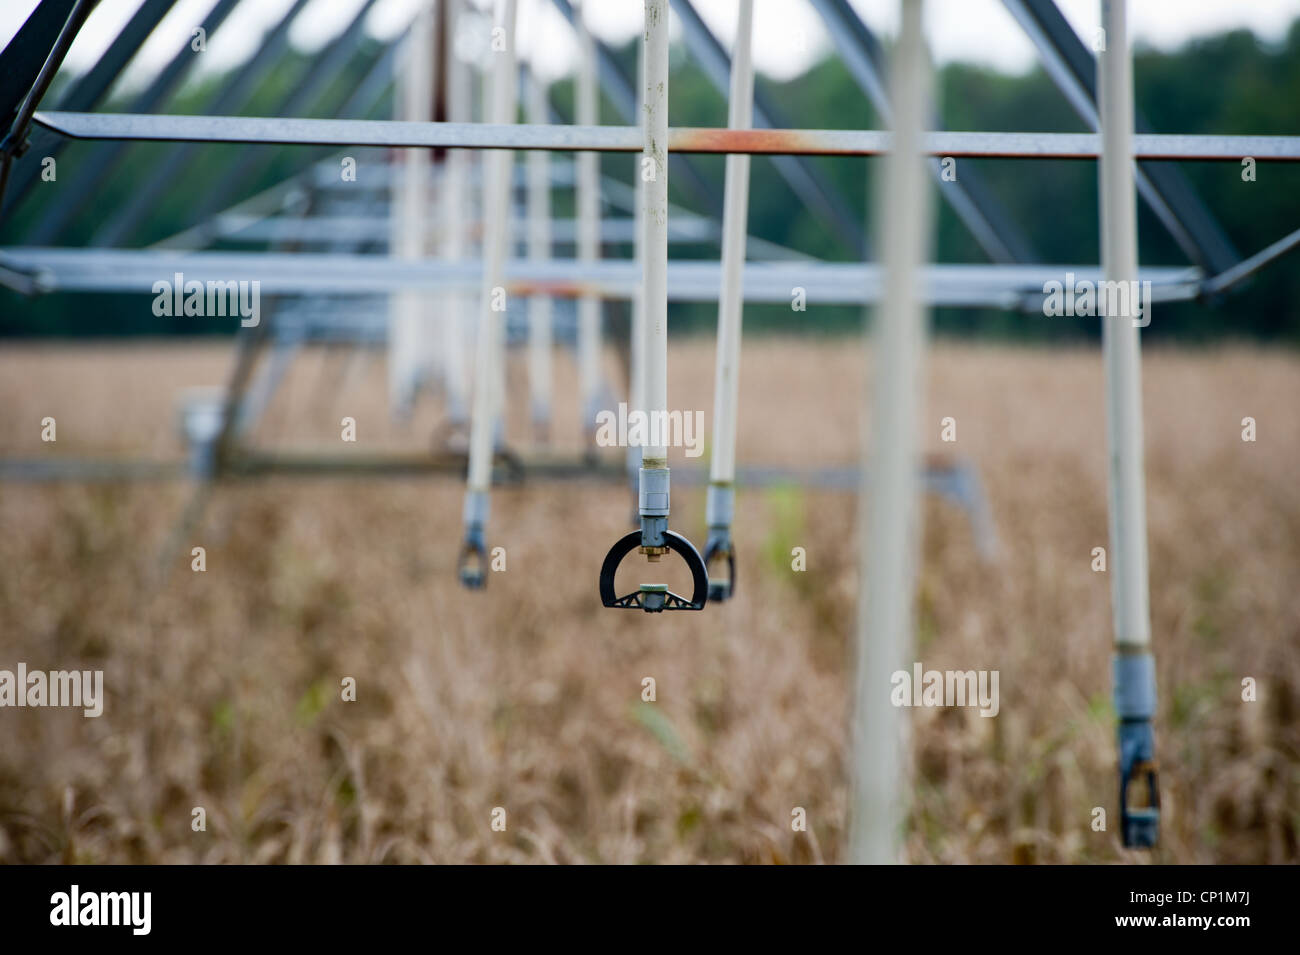 Irrigation system over corn crop Stock Photo